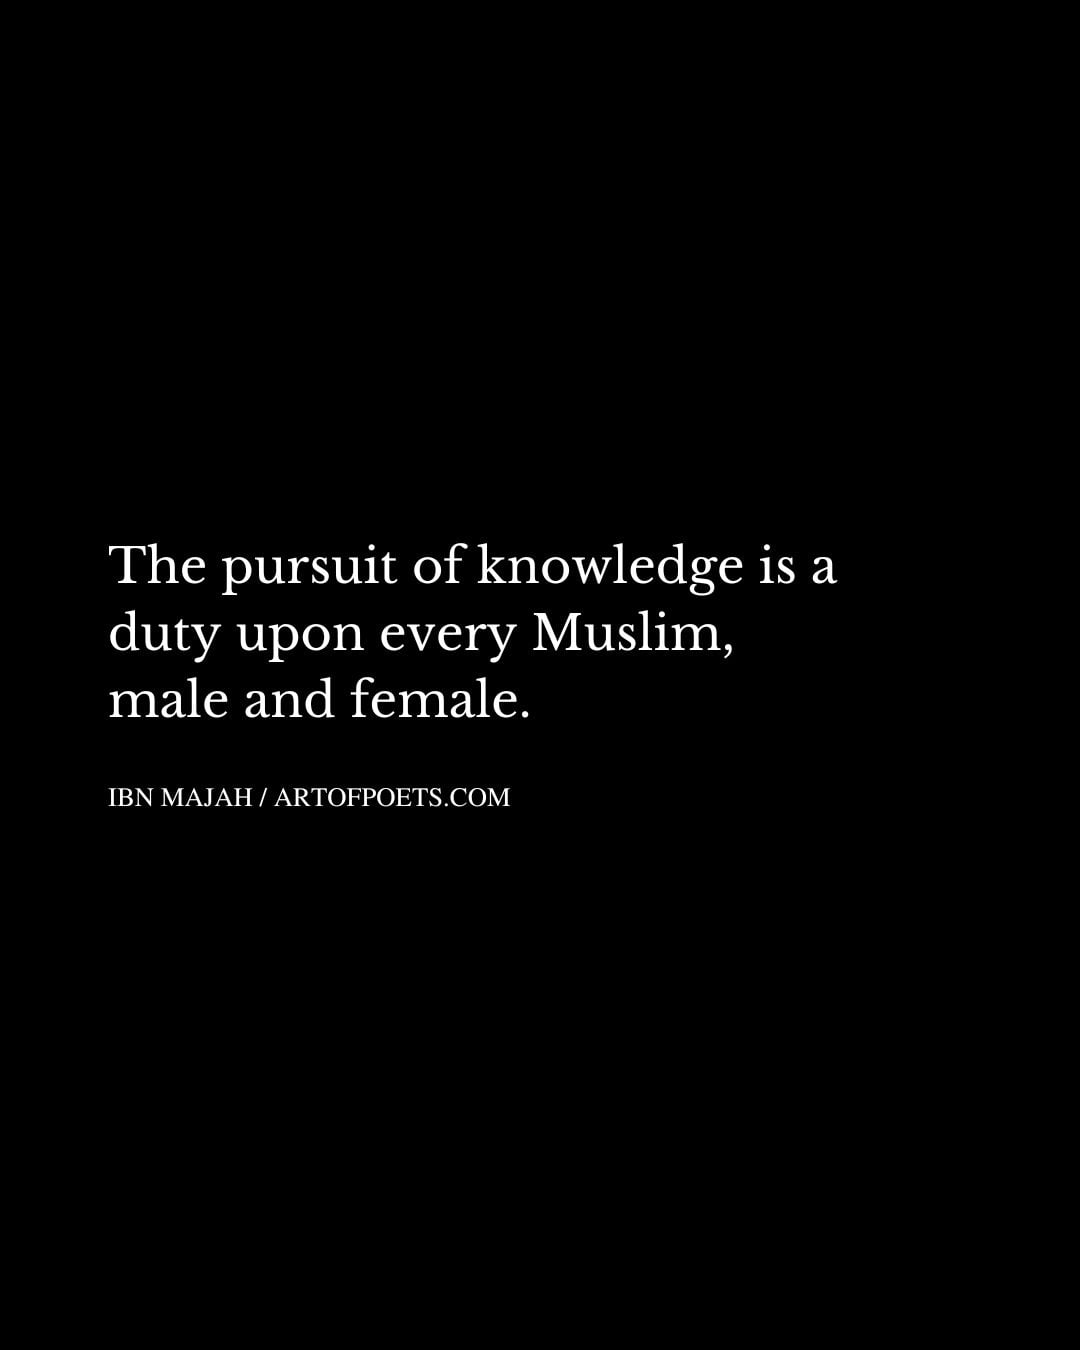 The pursuit of knowledge is a duty upon every Muslim male and female